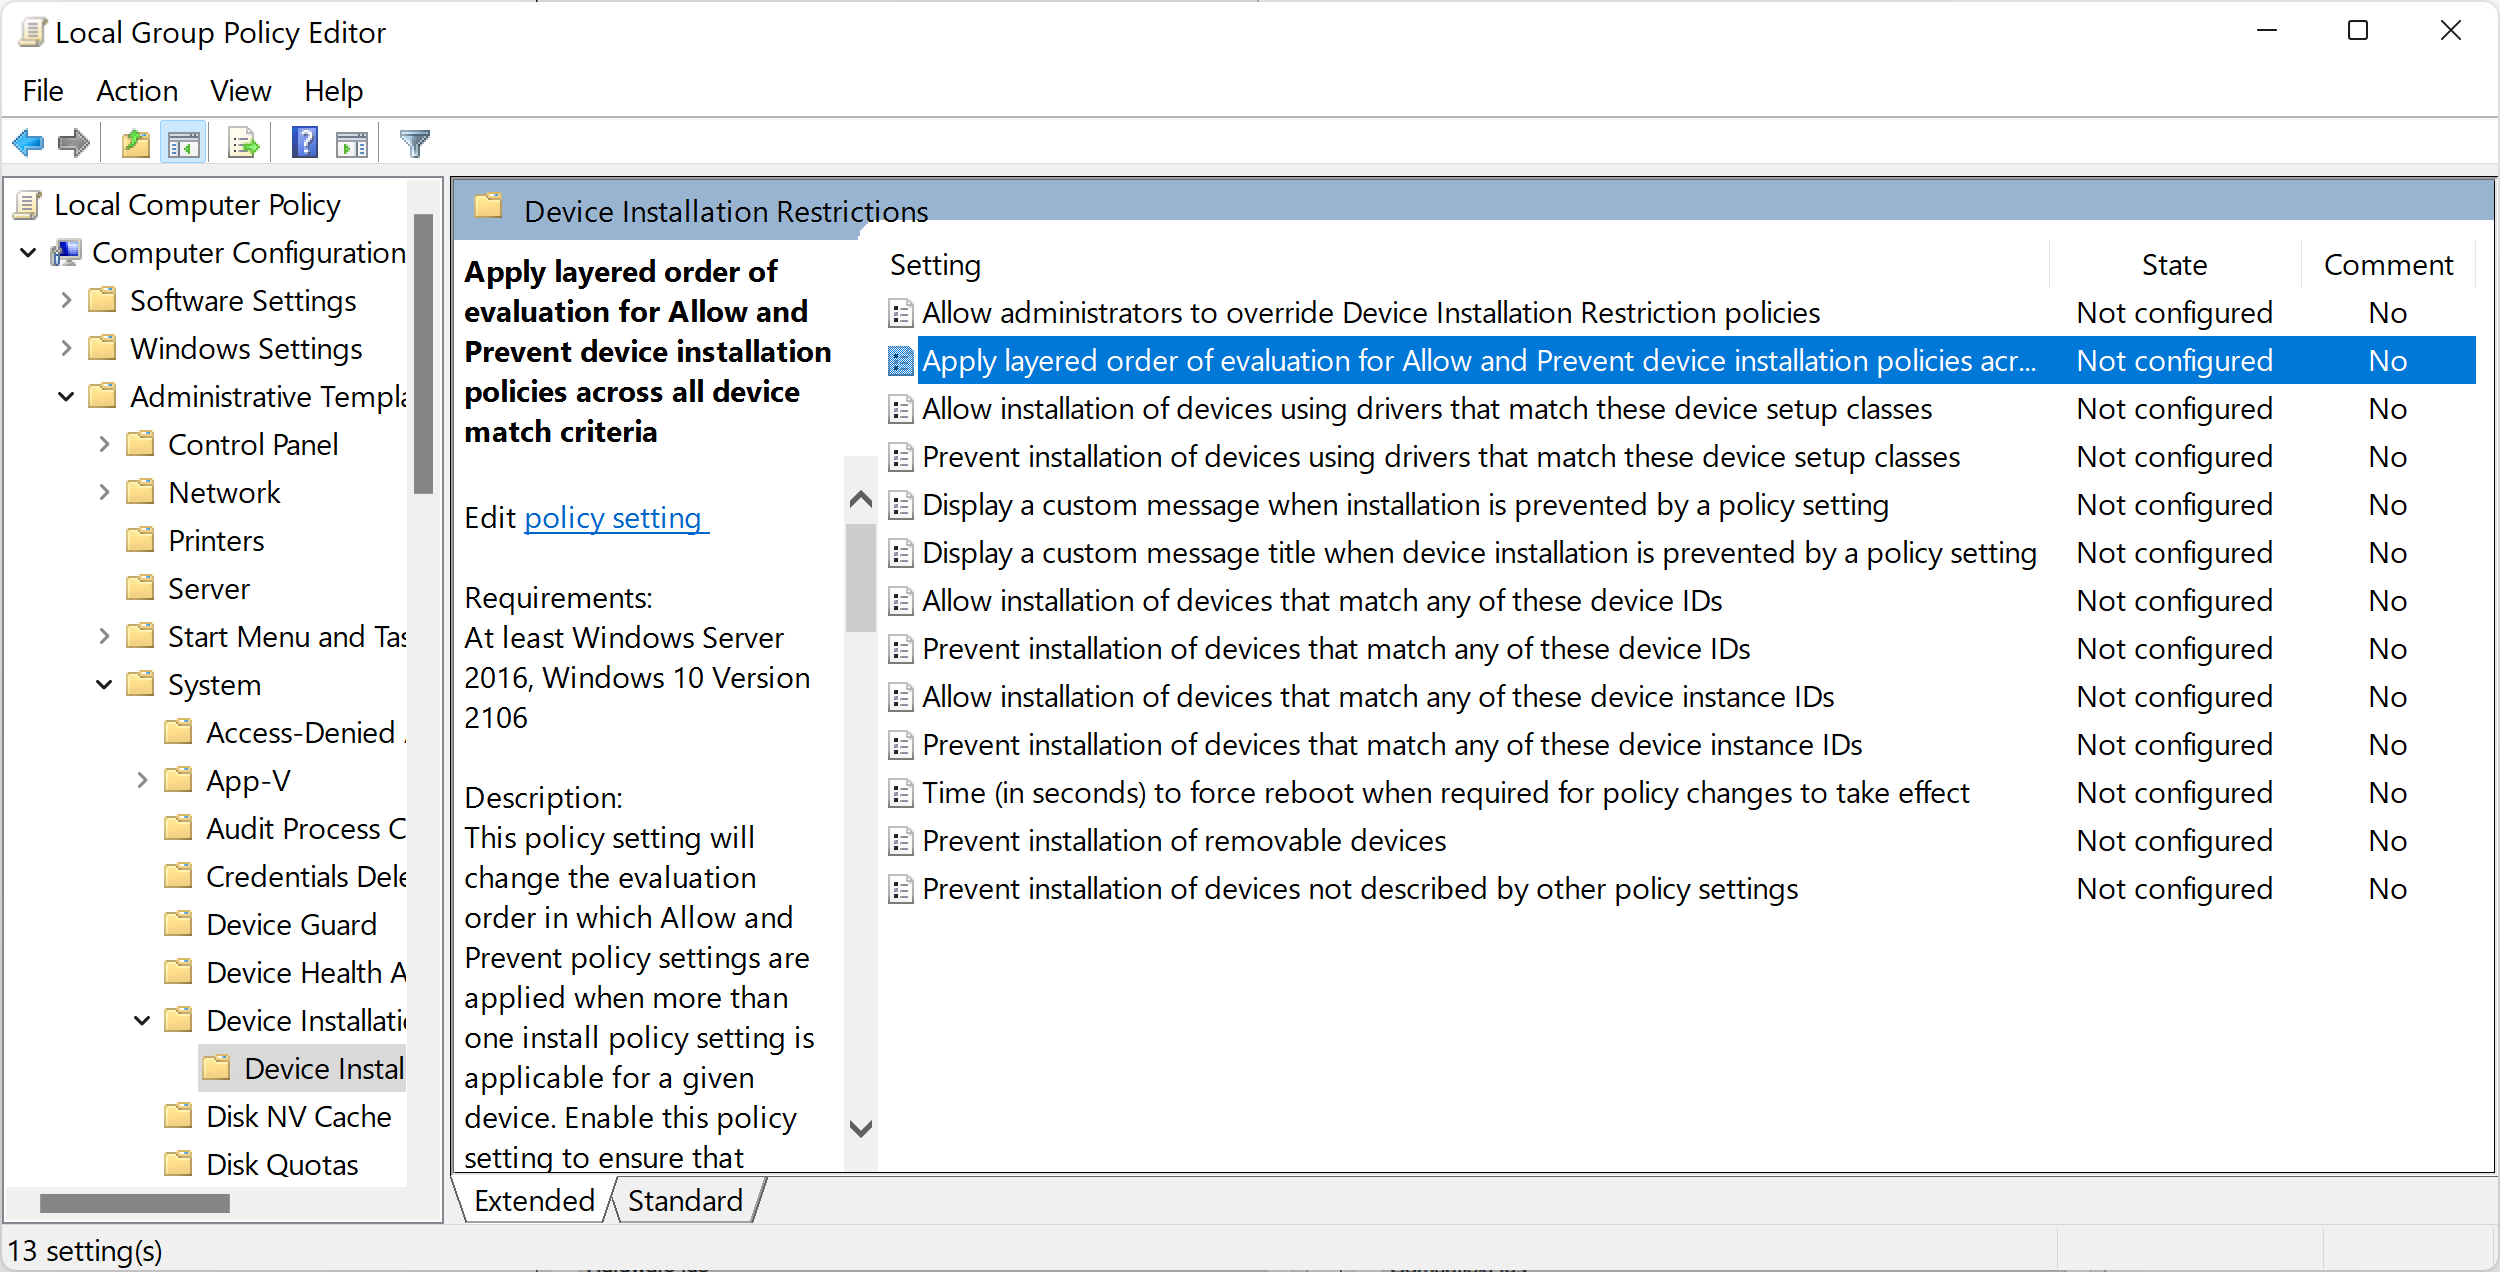 Open Device Manager by pressing Win+X and selecting Device Manager
Expand the Memory technology devices category